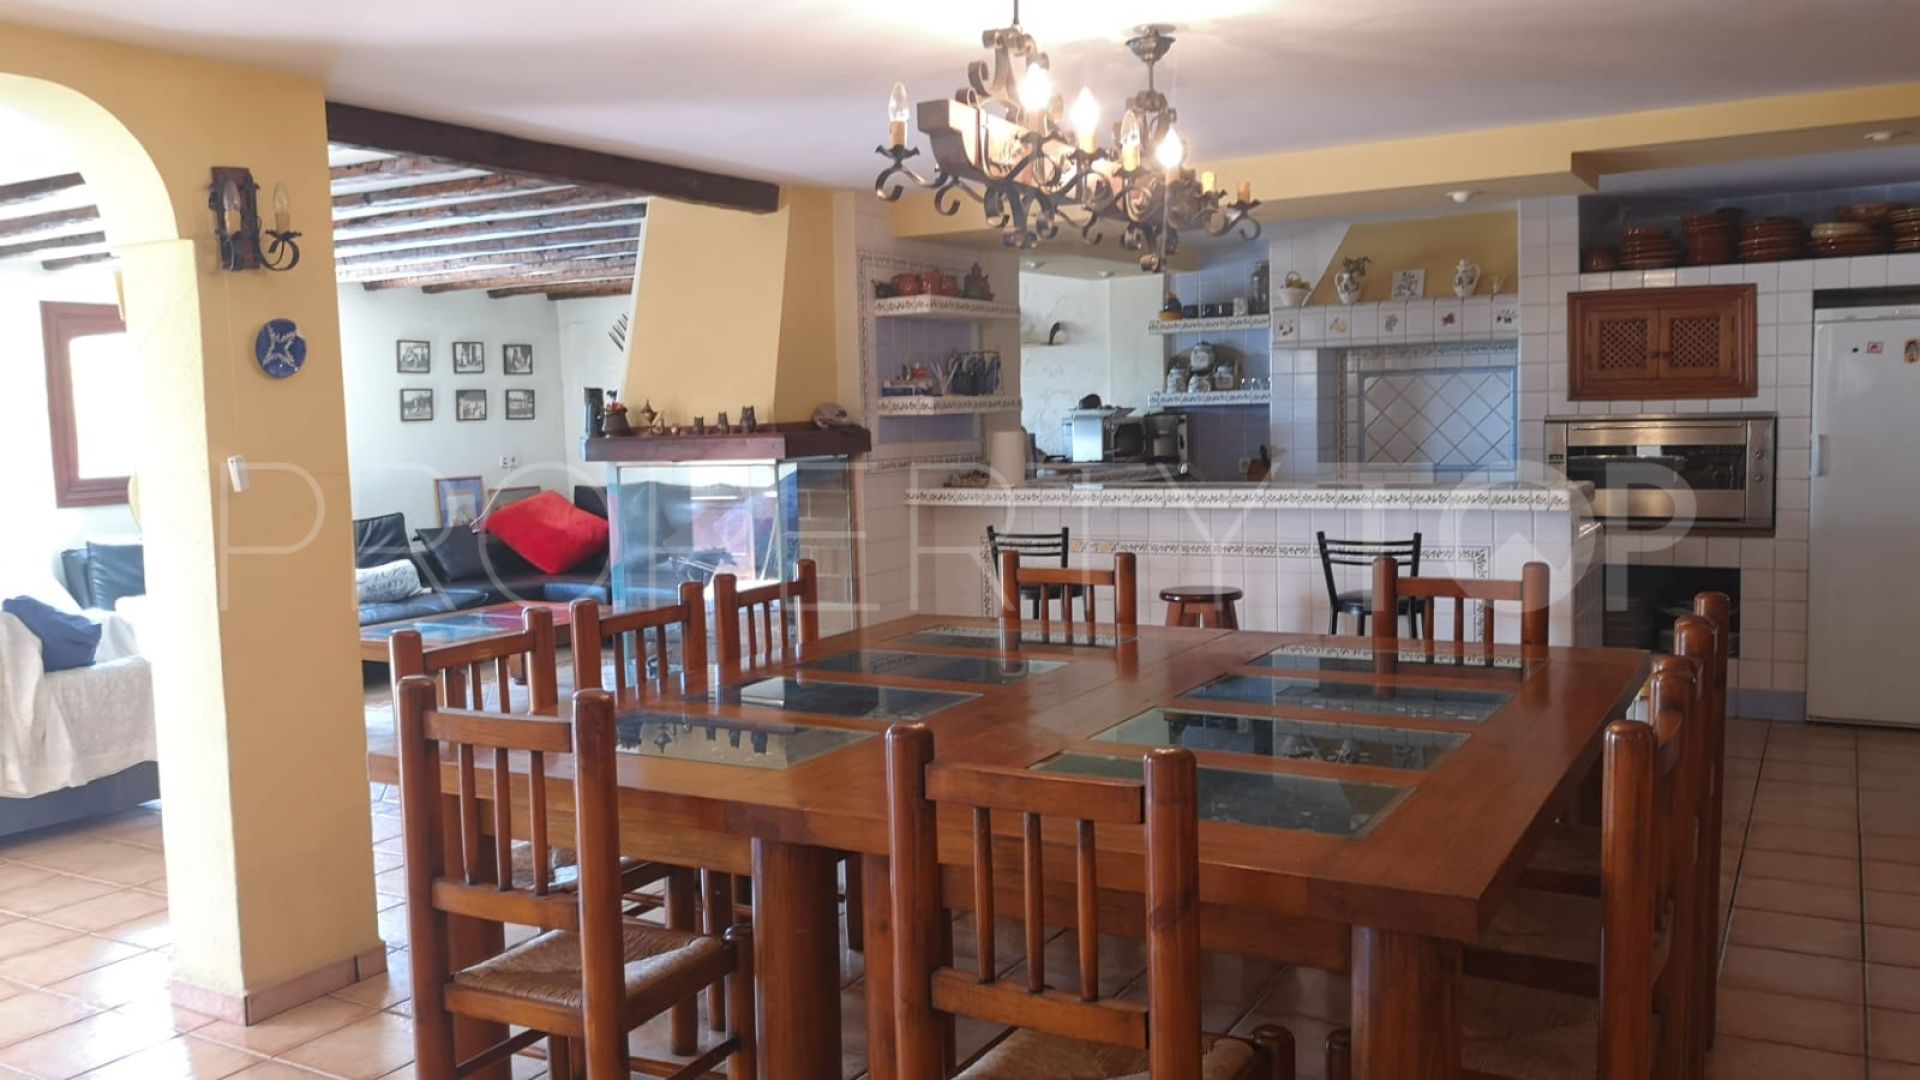 For sale house in Palmanova with 5 bedrooms